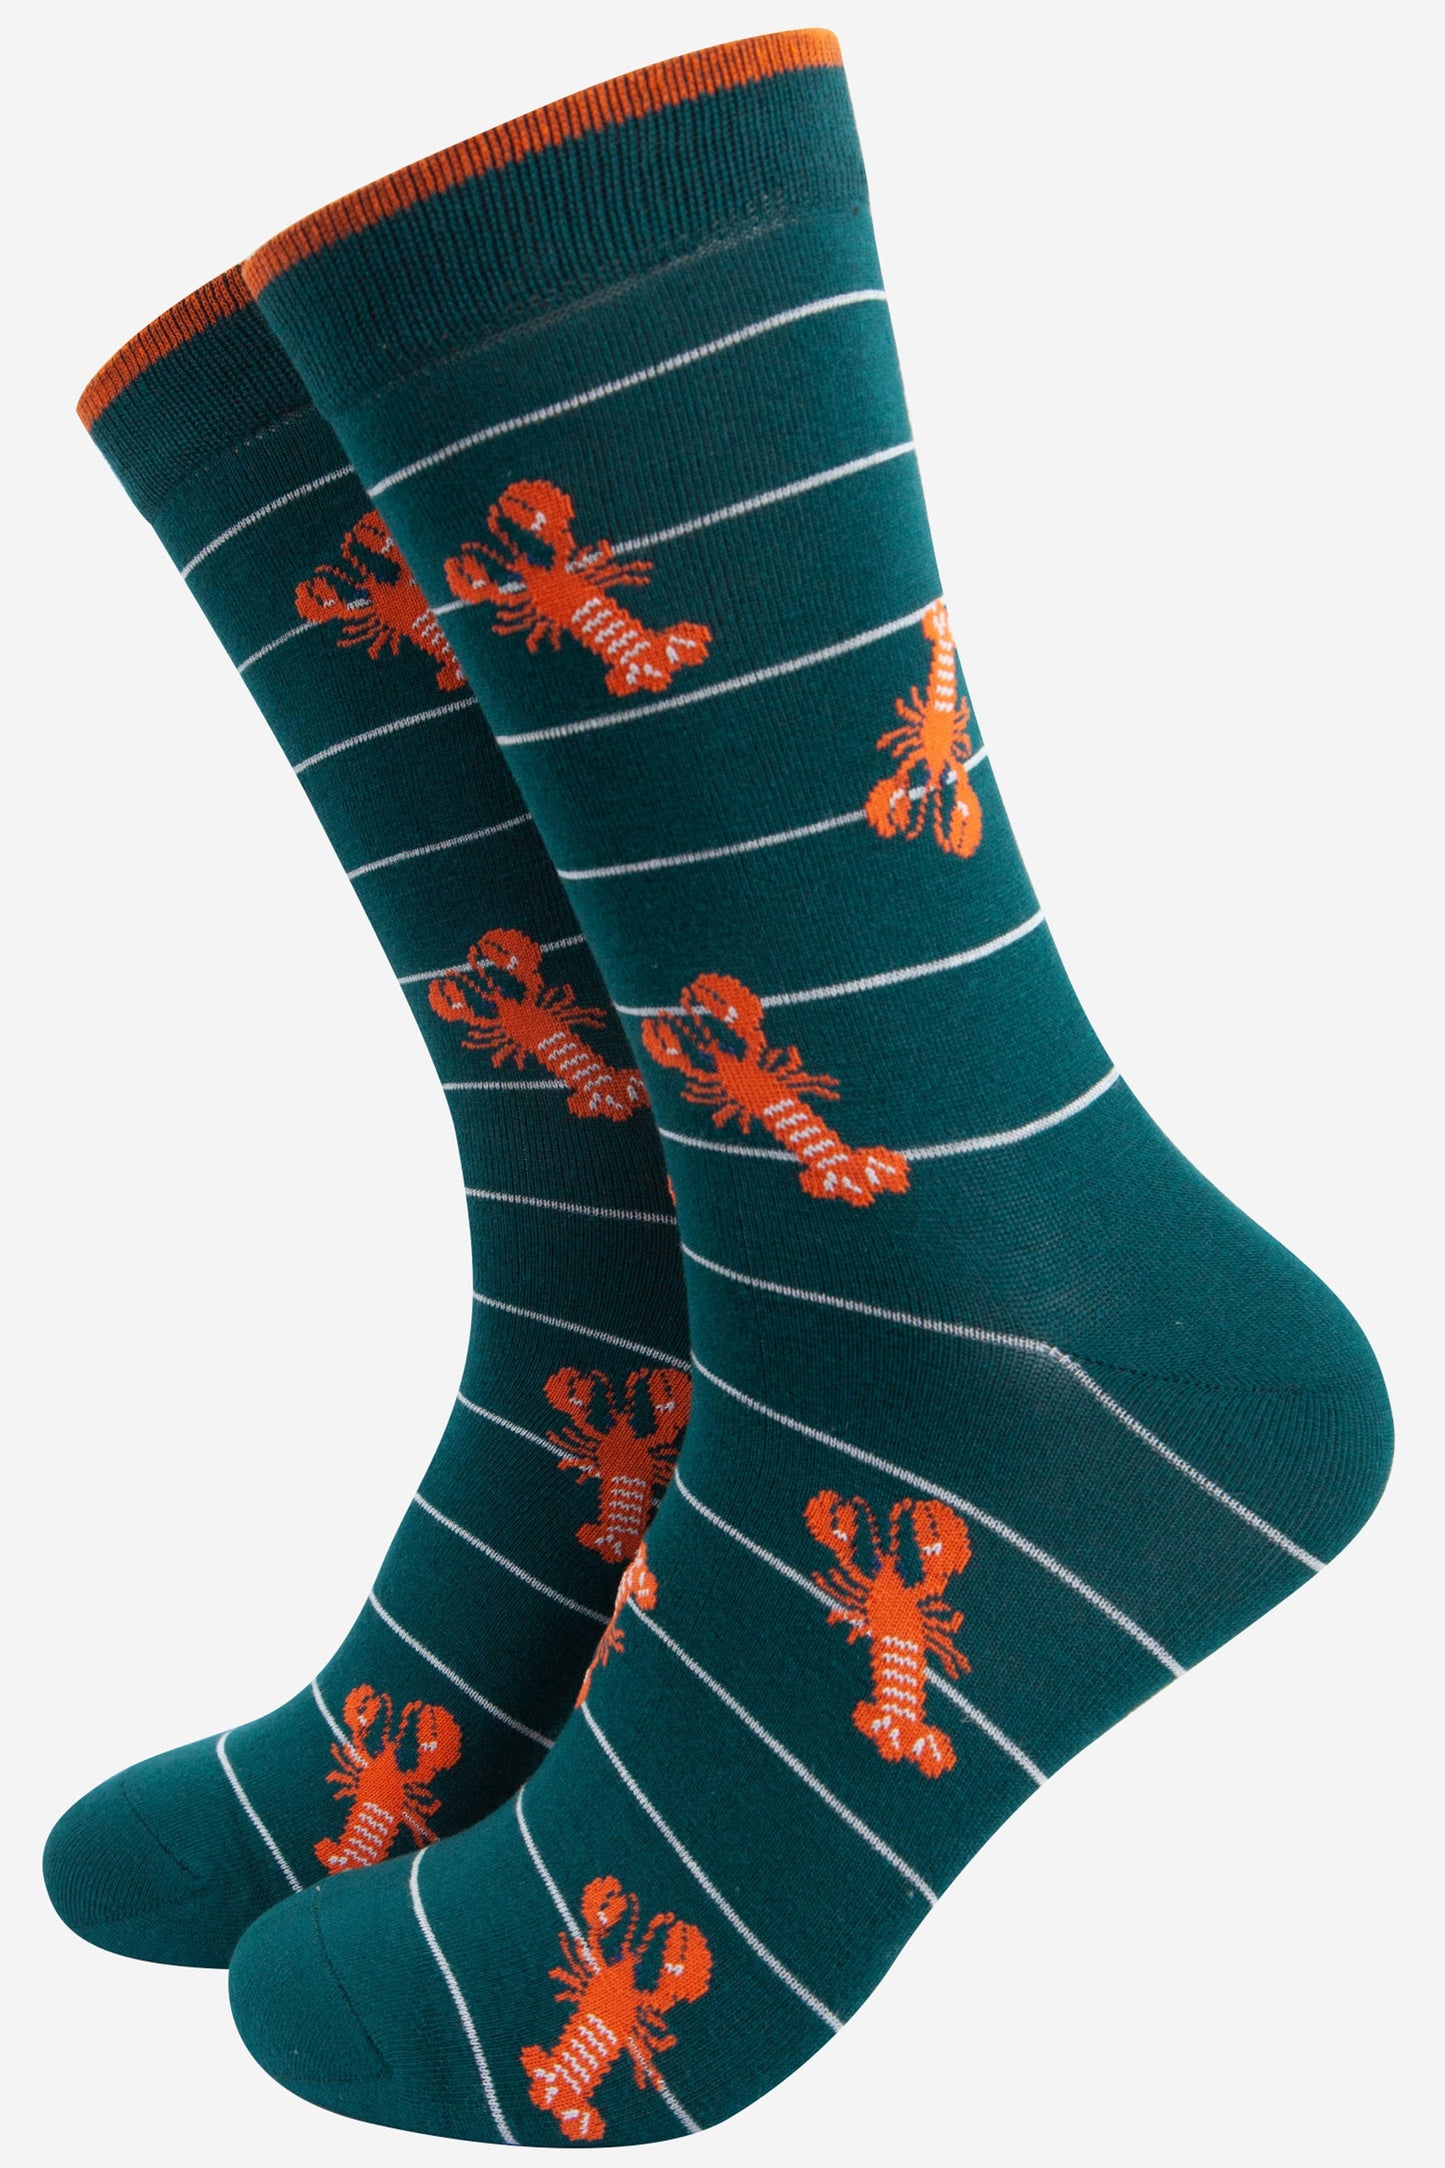 green socks with white horizontal stripes and an all over orange lobster pattern